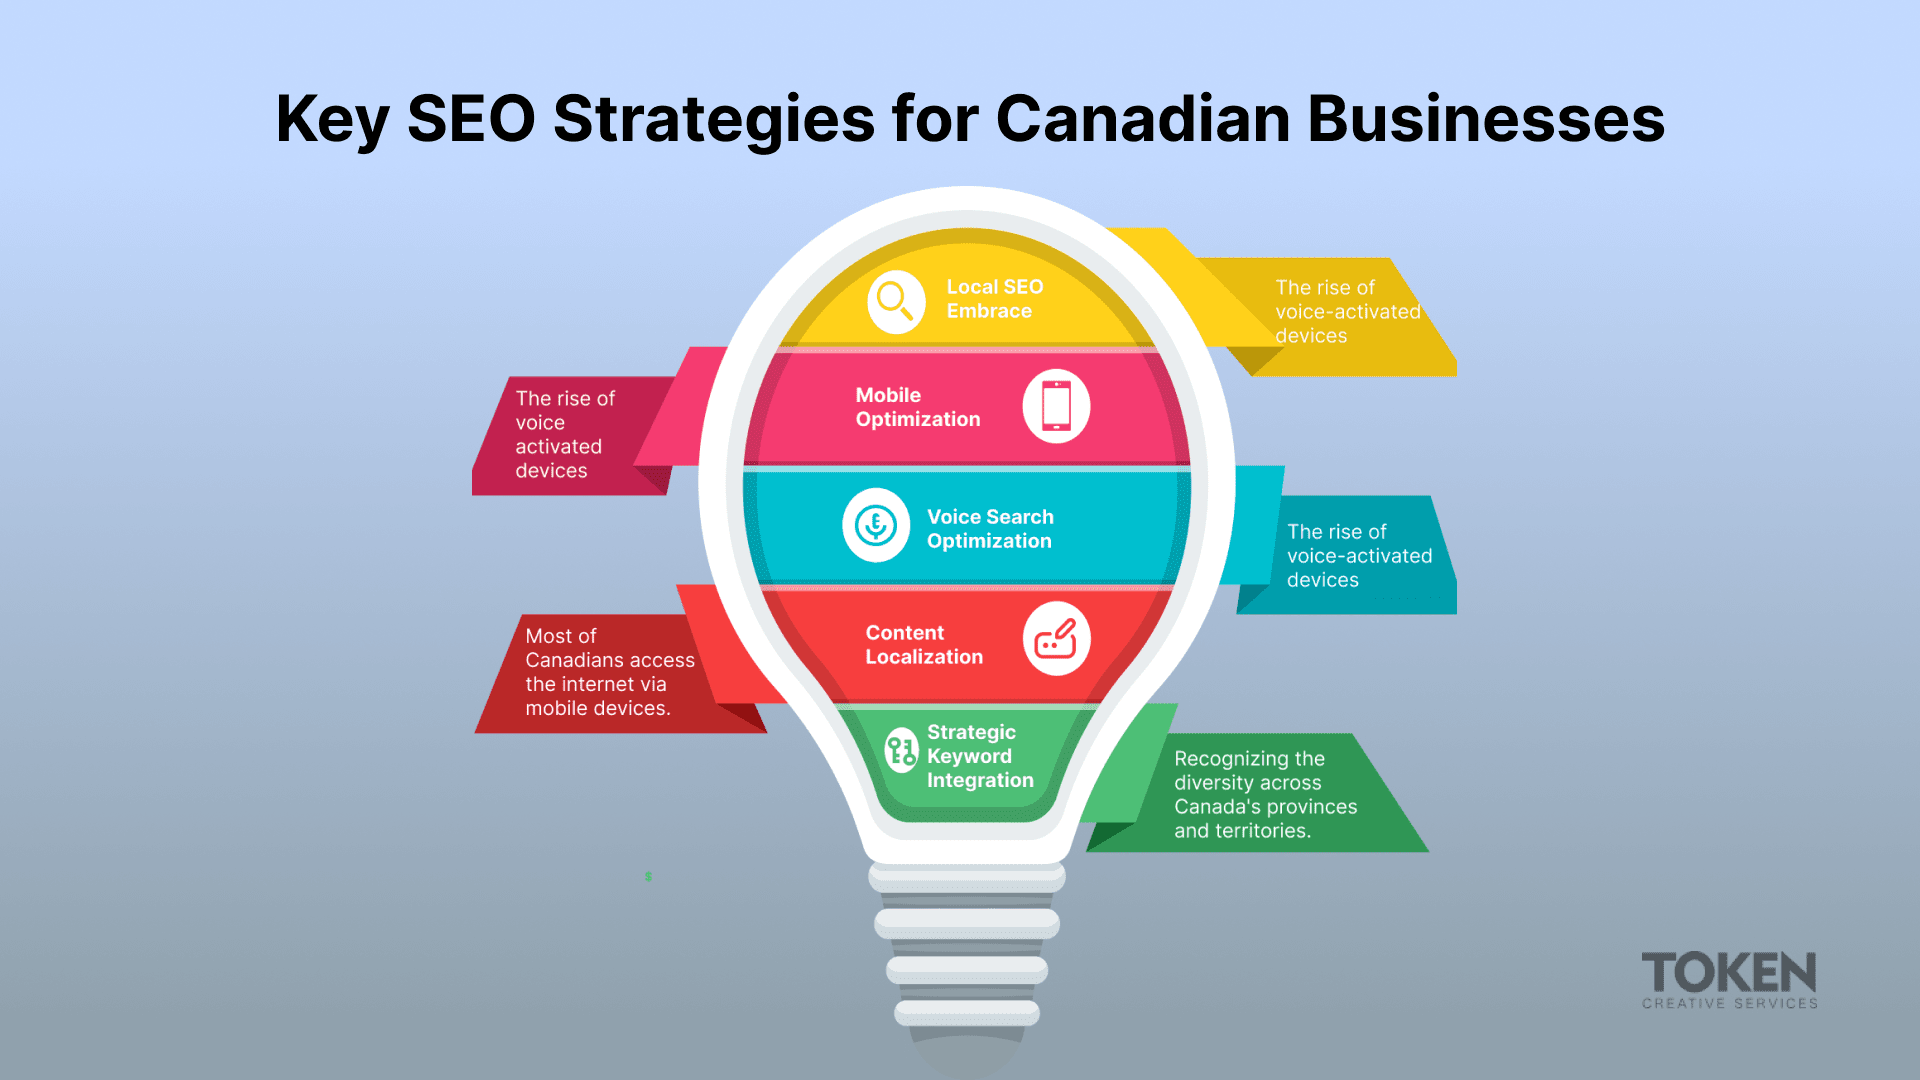 Key SEO Strategies for Canadian Businesses